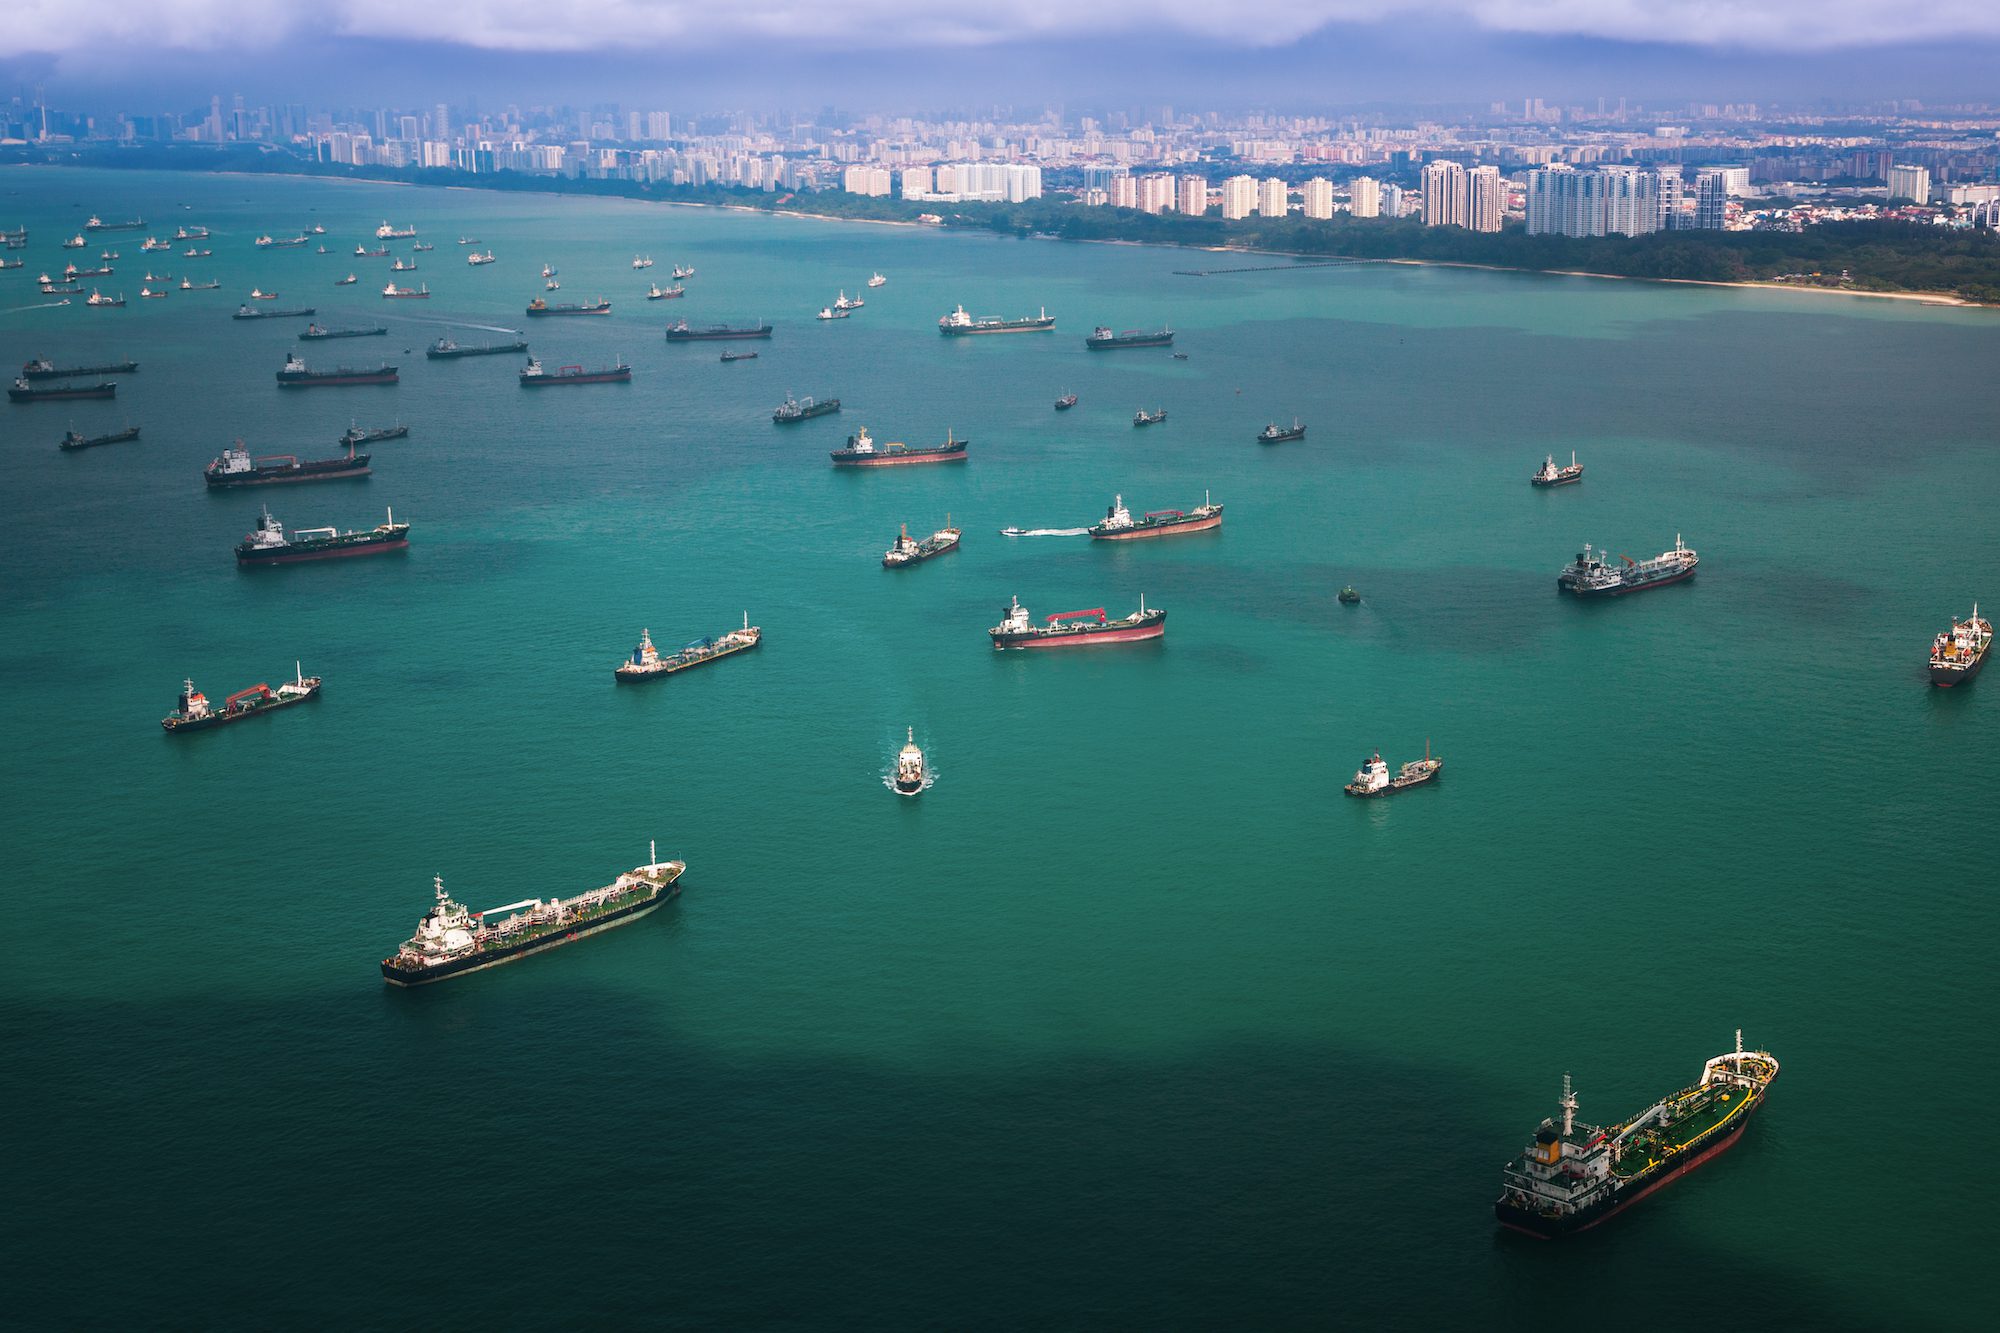 Singapore Bunker Sales Jump as Ships Reroute Around Cape of Good Hope